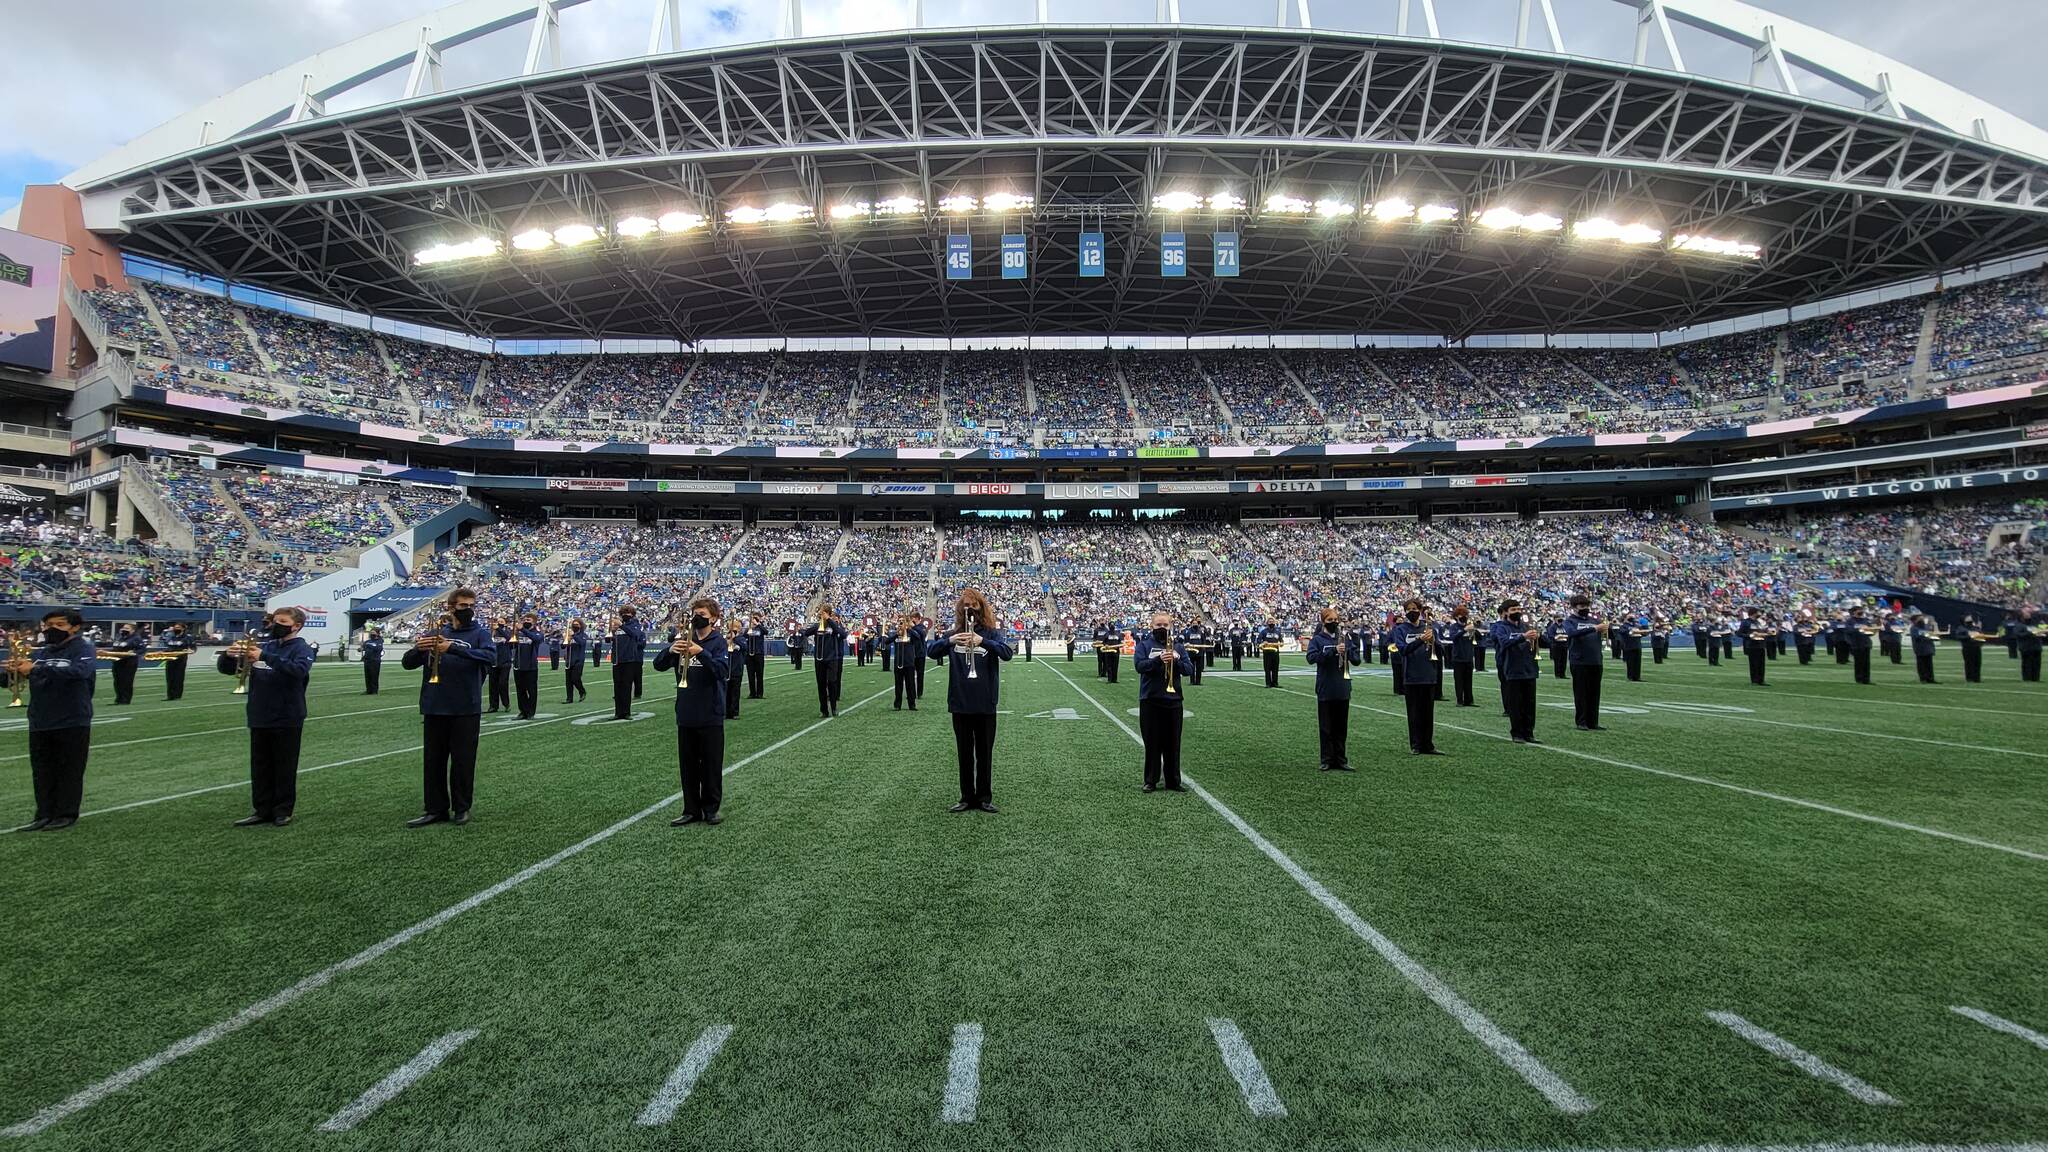 The Mercer Island High School marching band performed twice on Sept. 19 at the Seattle Seahawks’ regular season home opener versus the Tennessee Titans at Lumen Field. The Islanders first took the field for a special pregame concert featuring Seattle’s Macklemore and singer-guitarist Ayron Jones and provided visual support sans instruments. At halftime, the band played the CBS Sports/NFL theme. Tennessee beat the Seahawks, 33-30, in overtime. Photo courtesy of Joe Chen